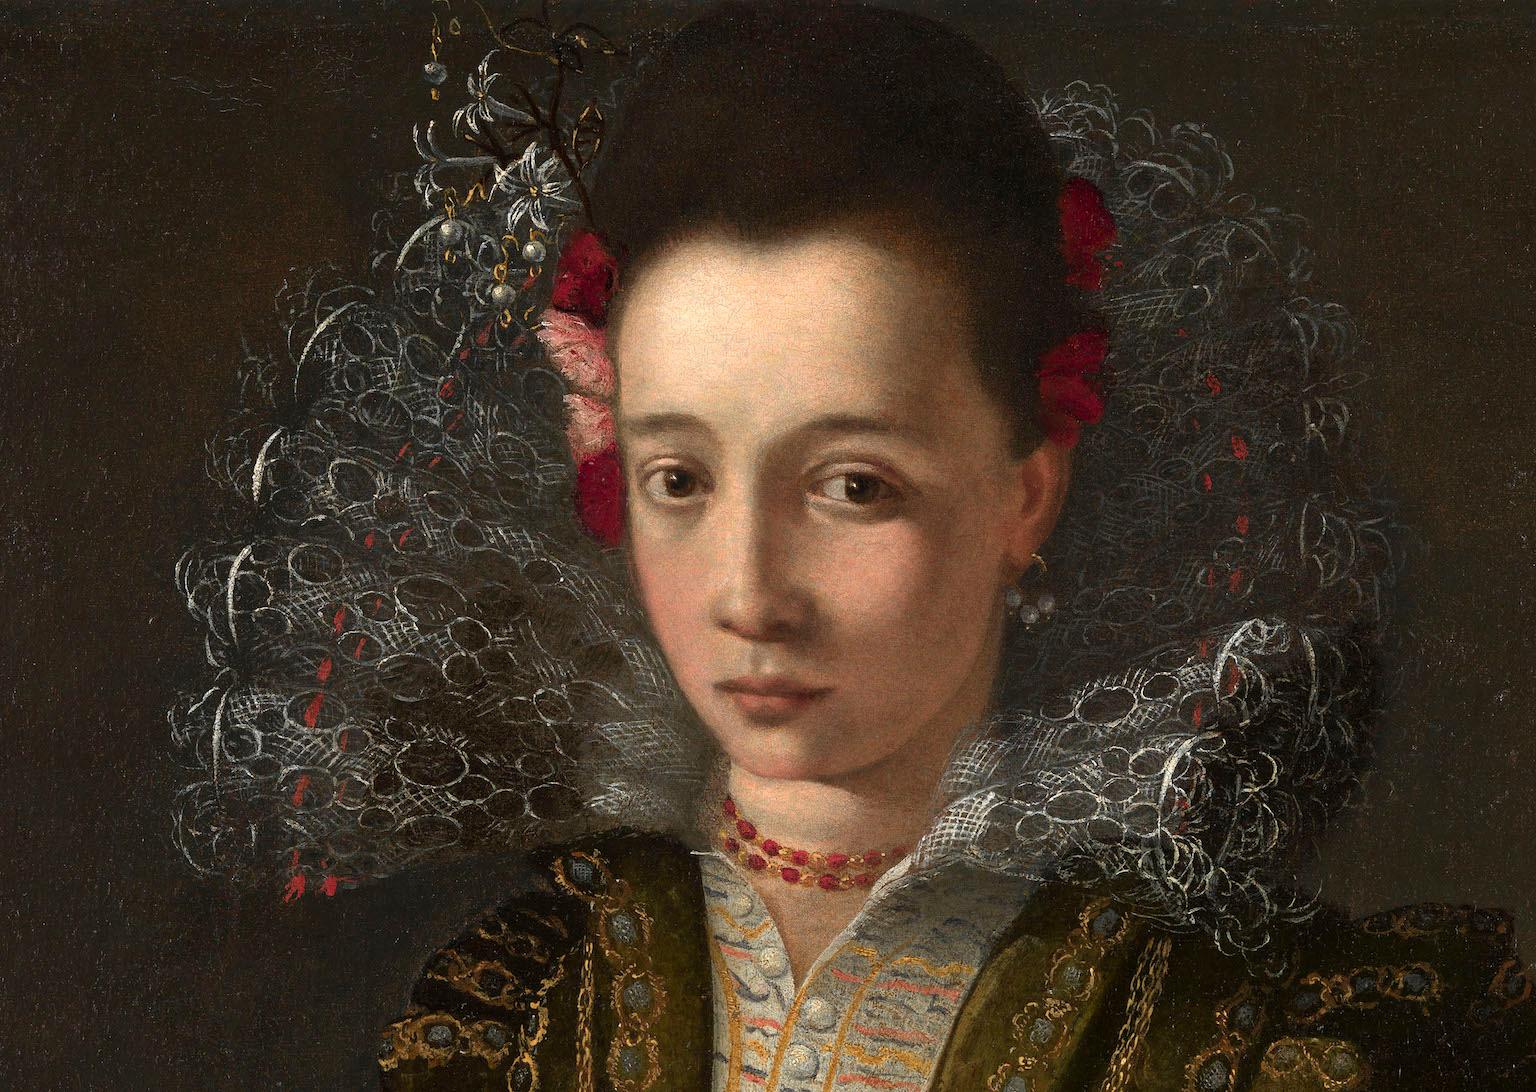 Portrait of A Girl - Painting by Lavinia Fontana